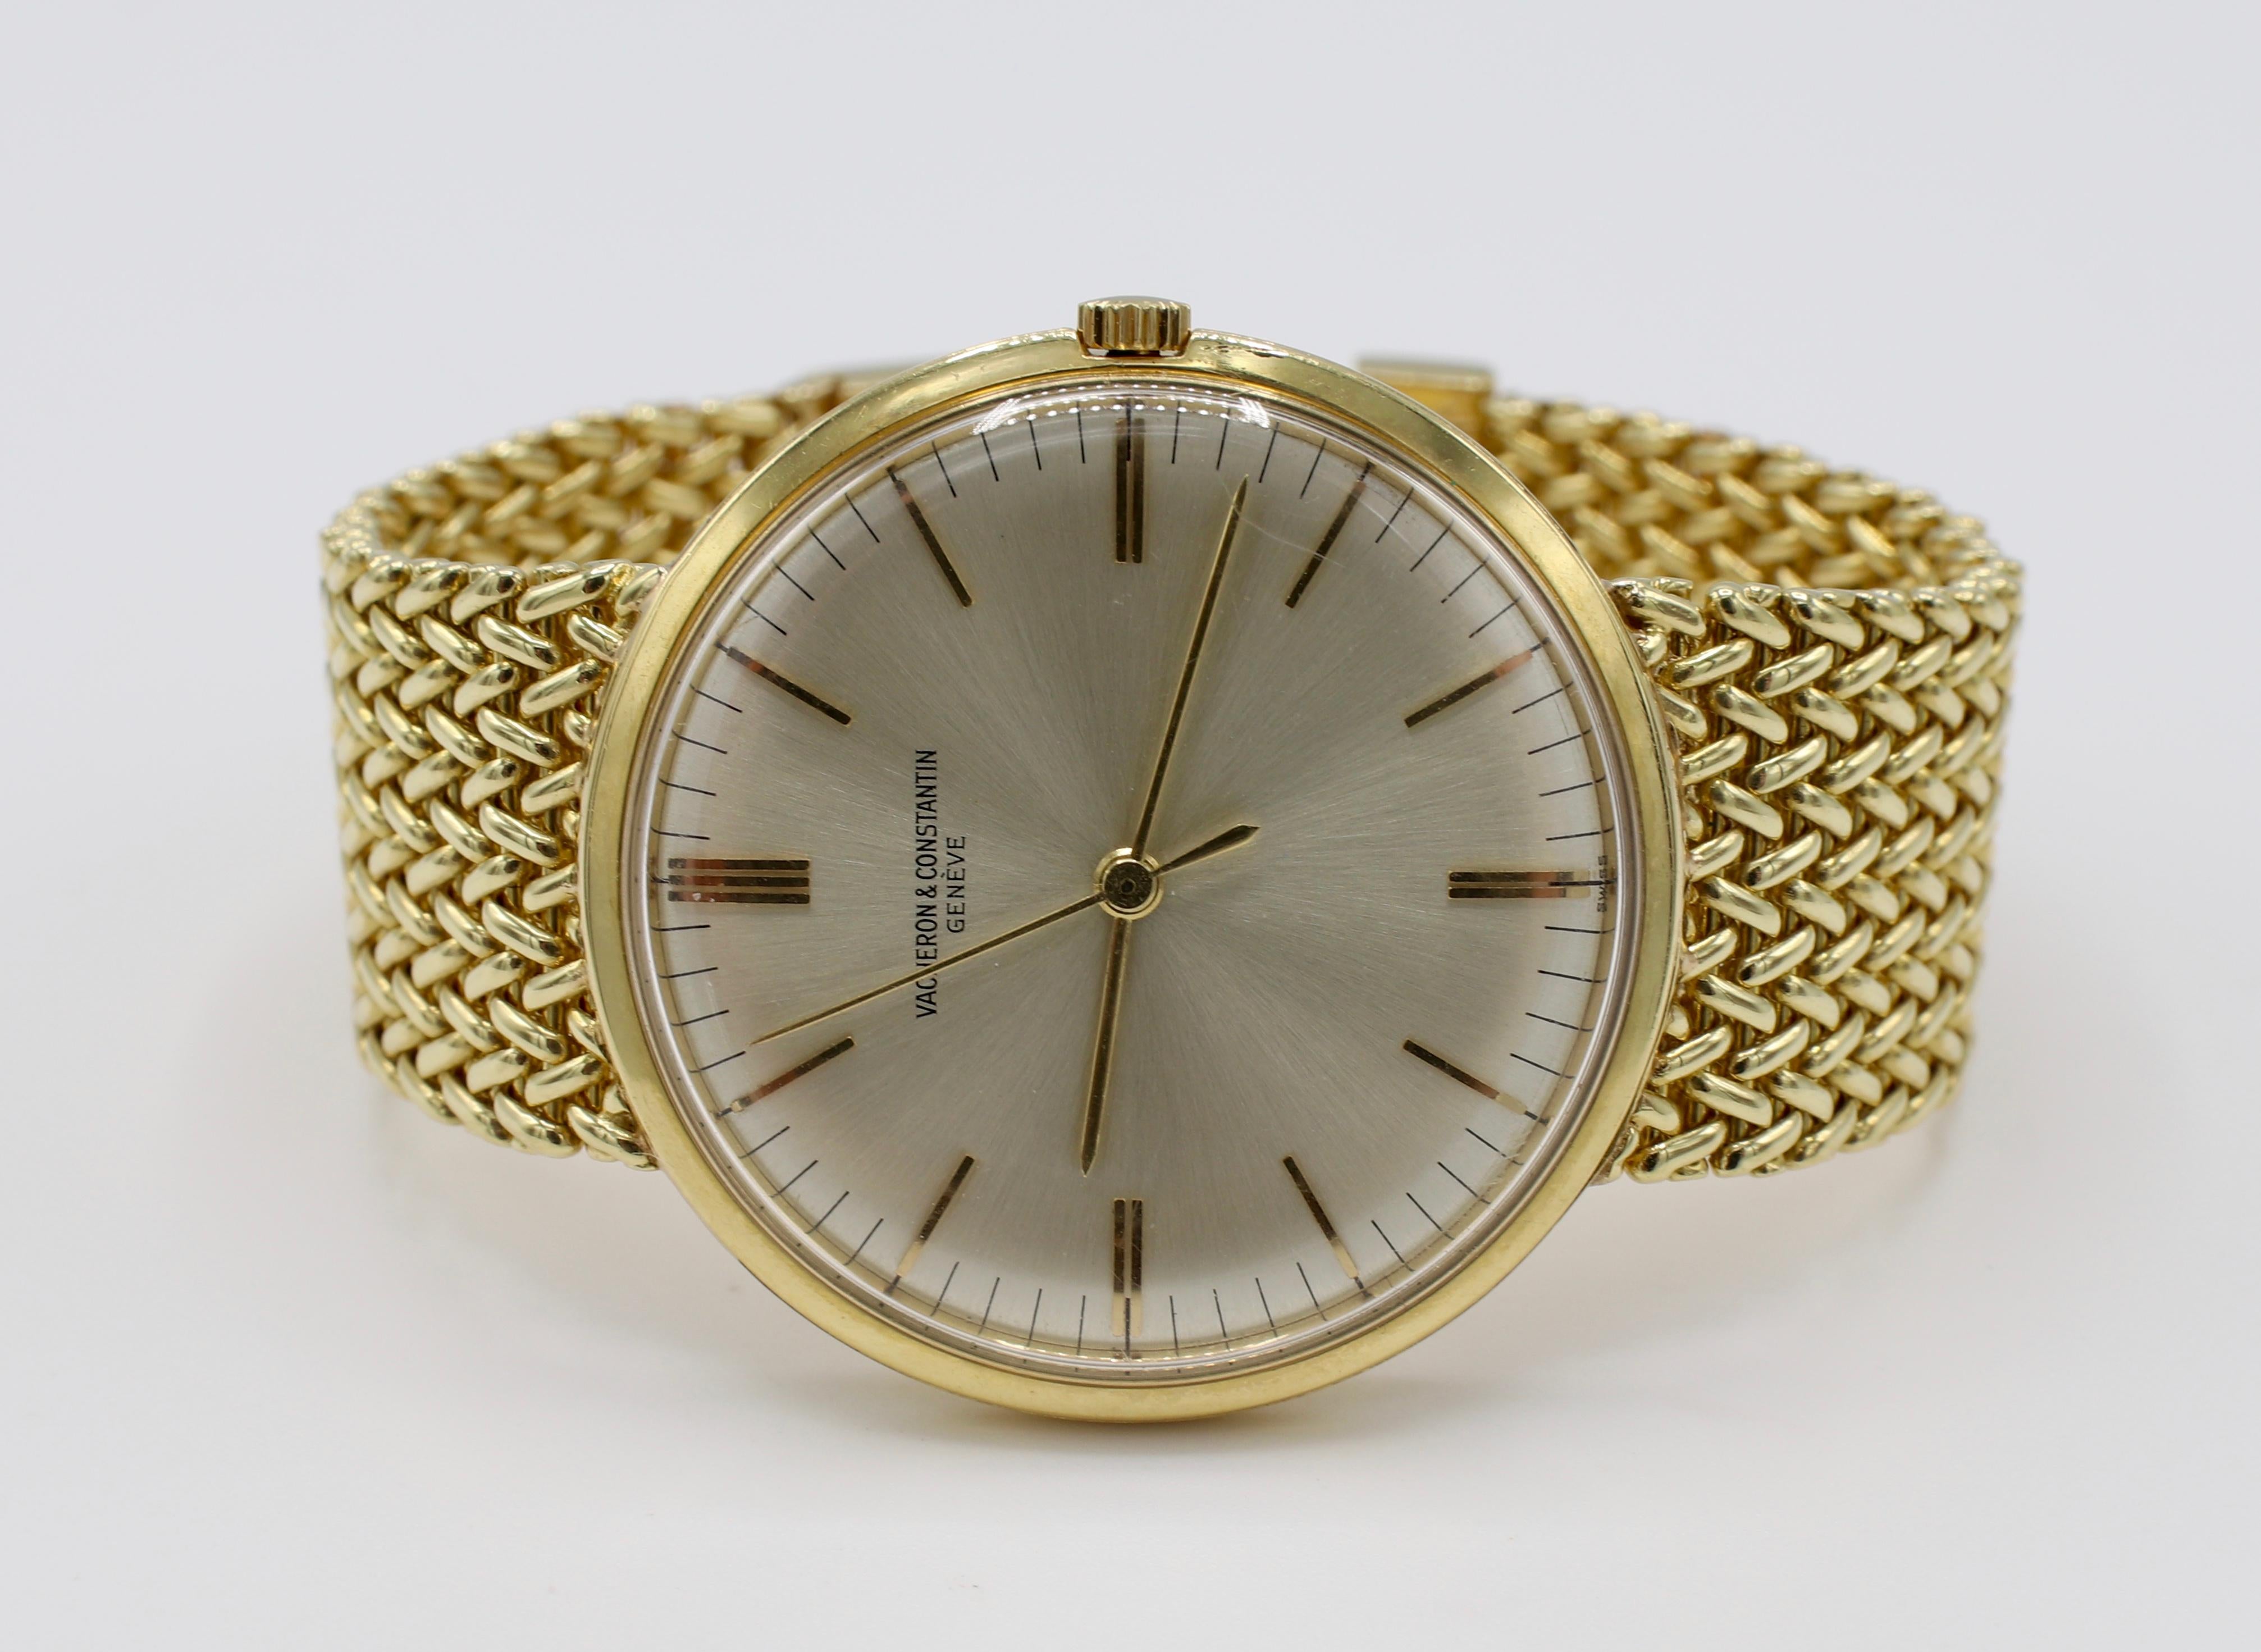 Vacheron Constantin 18K Yellow Gold Watch 

Metal: 18k yellow gold
Weight: 65.72 grams
Model: 6903
Serial: 405***
Length: 6.5 inches
Crystal: Acrylic
Dial: Silver
Movement: Manual wind
34mm

